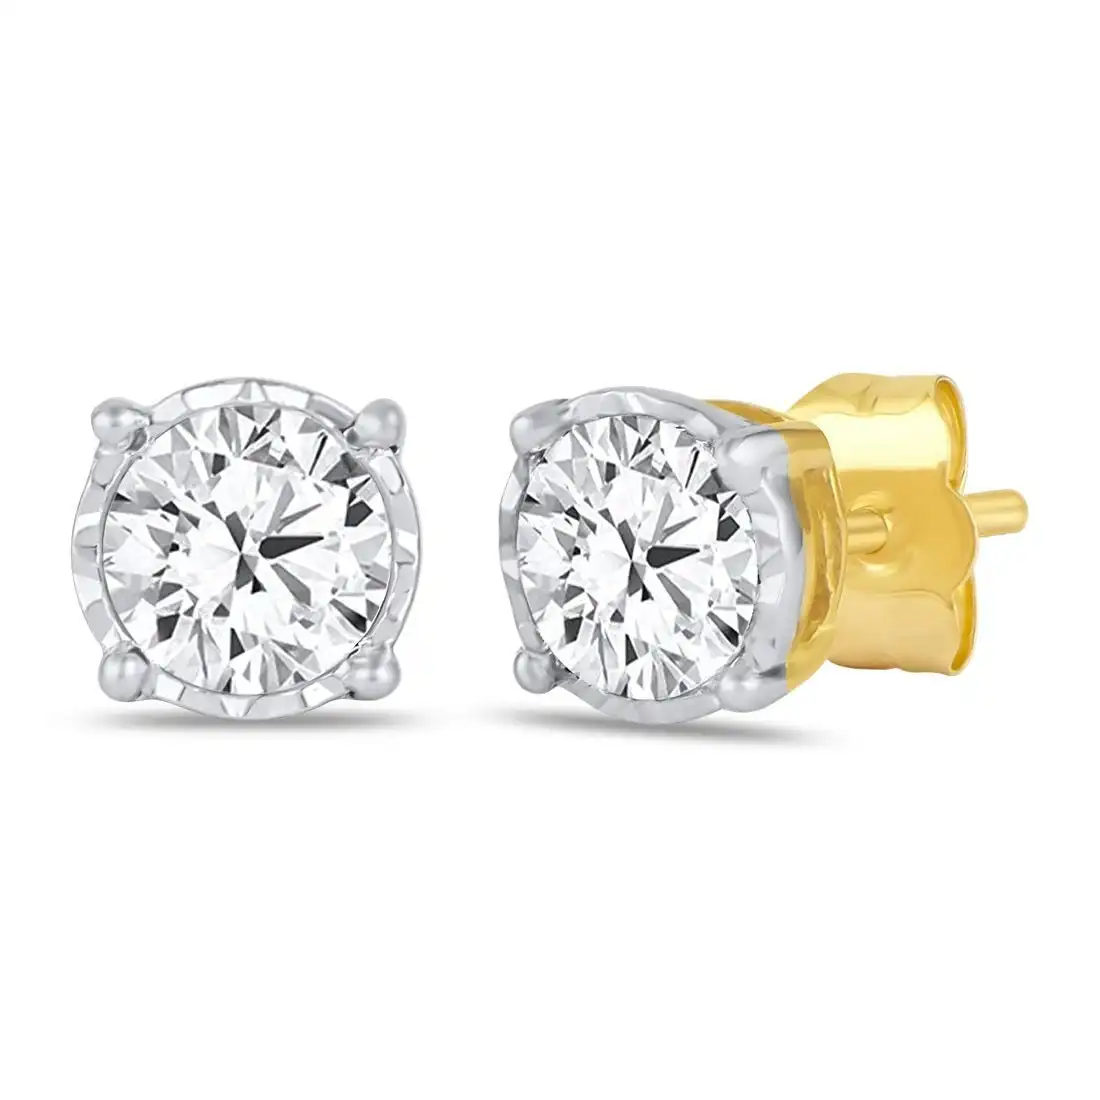 Tia Miracle Stud Earrings with 0.30ct of Diamonds in 9ct Yellow Gold